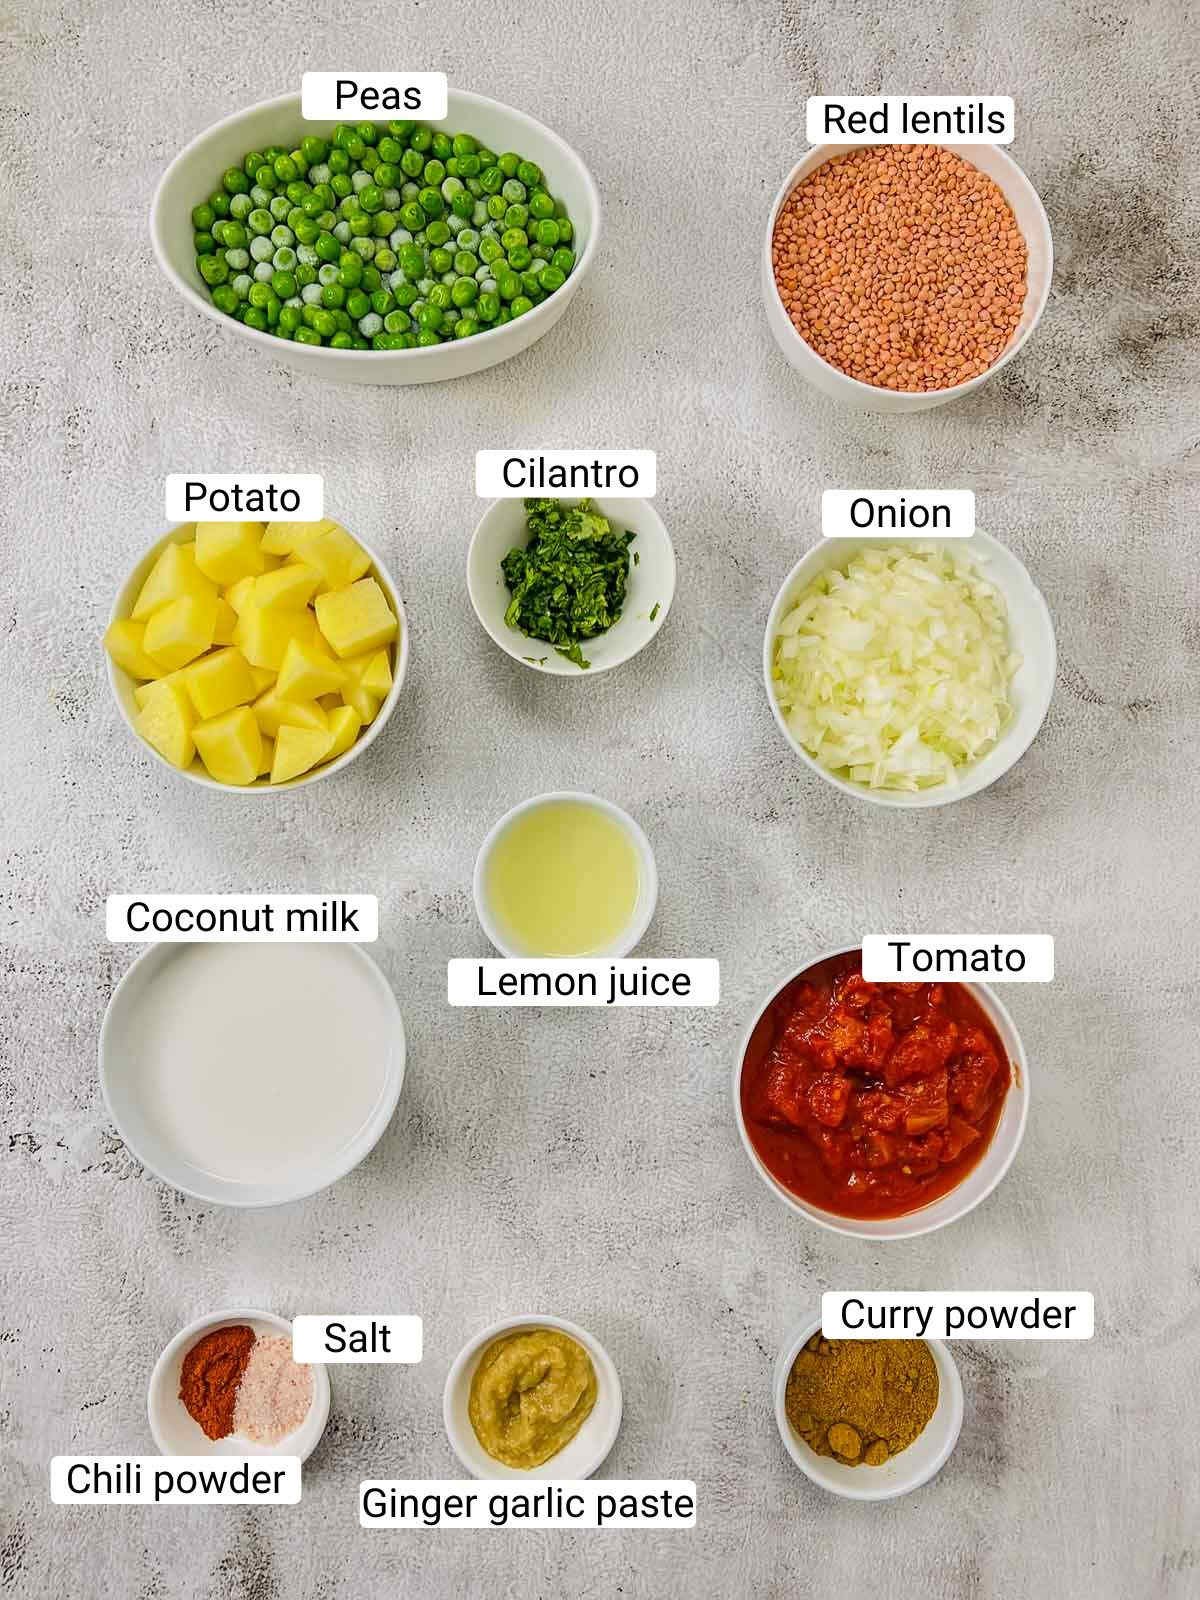 Ingredients to make lentil peas potato curry on a white surface.